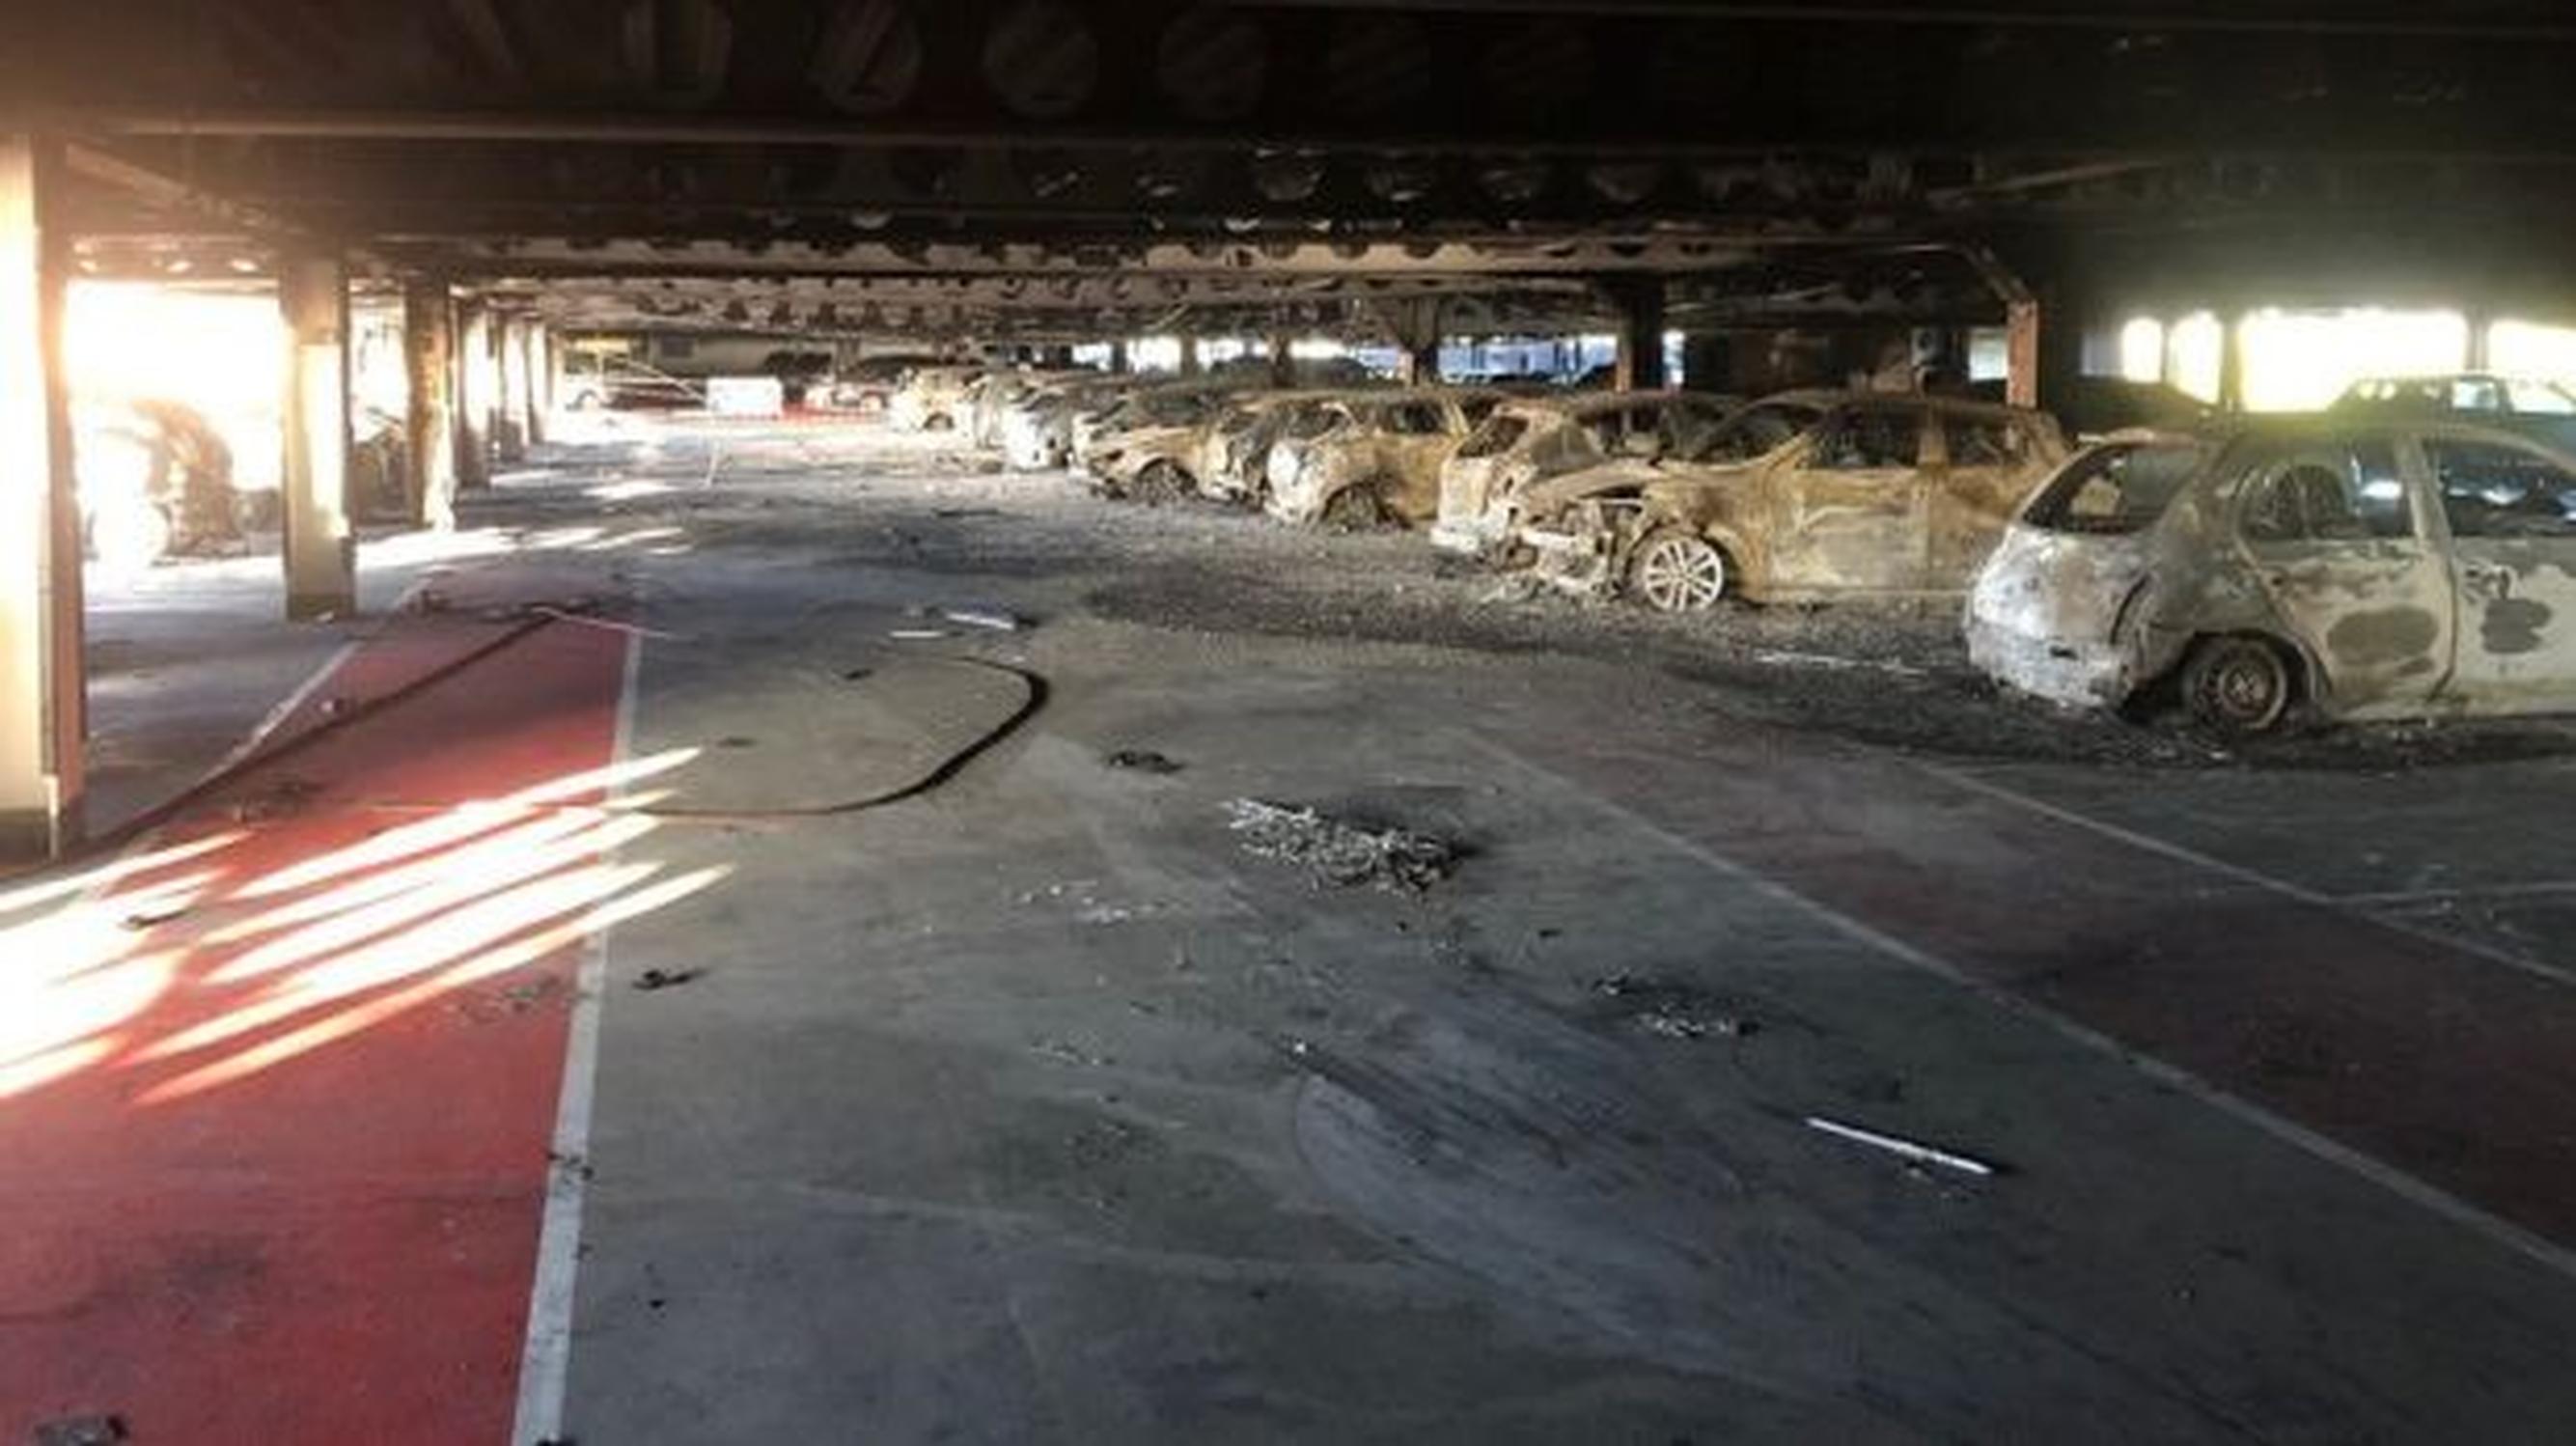 The burned out interior of a car park in Cork, Ireland (Cork Fire Brigade)